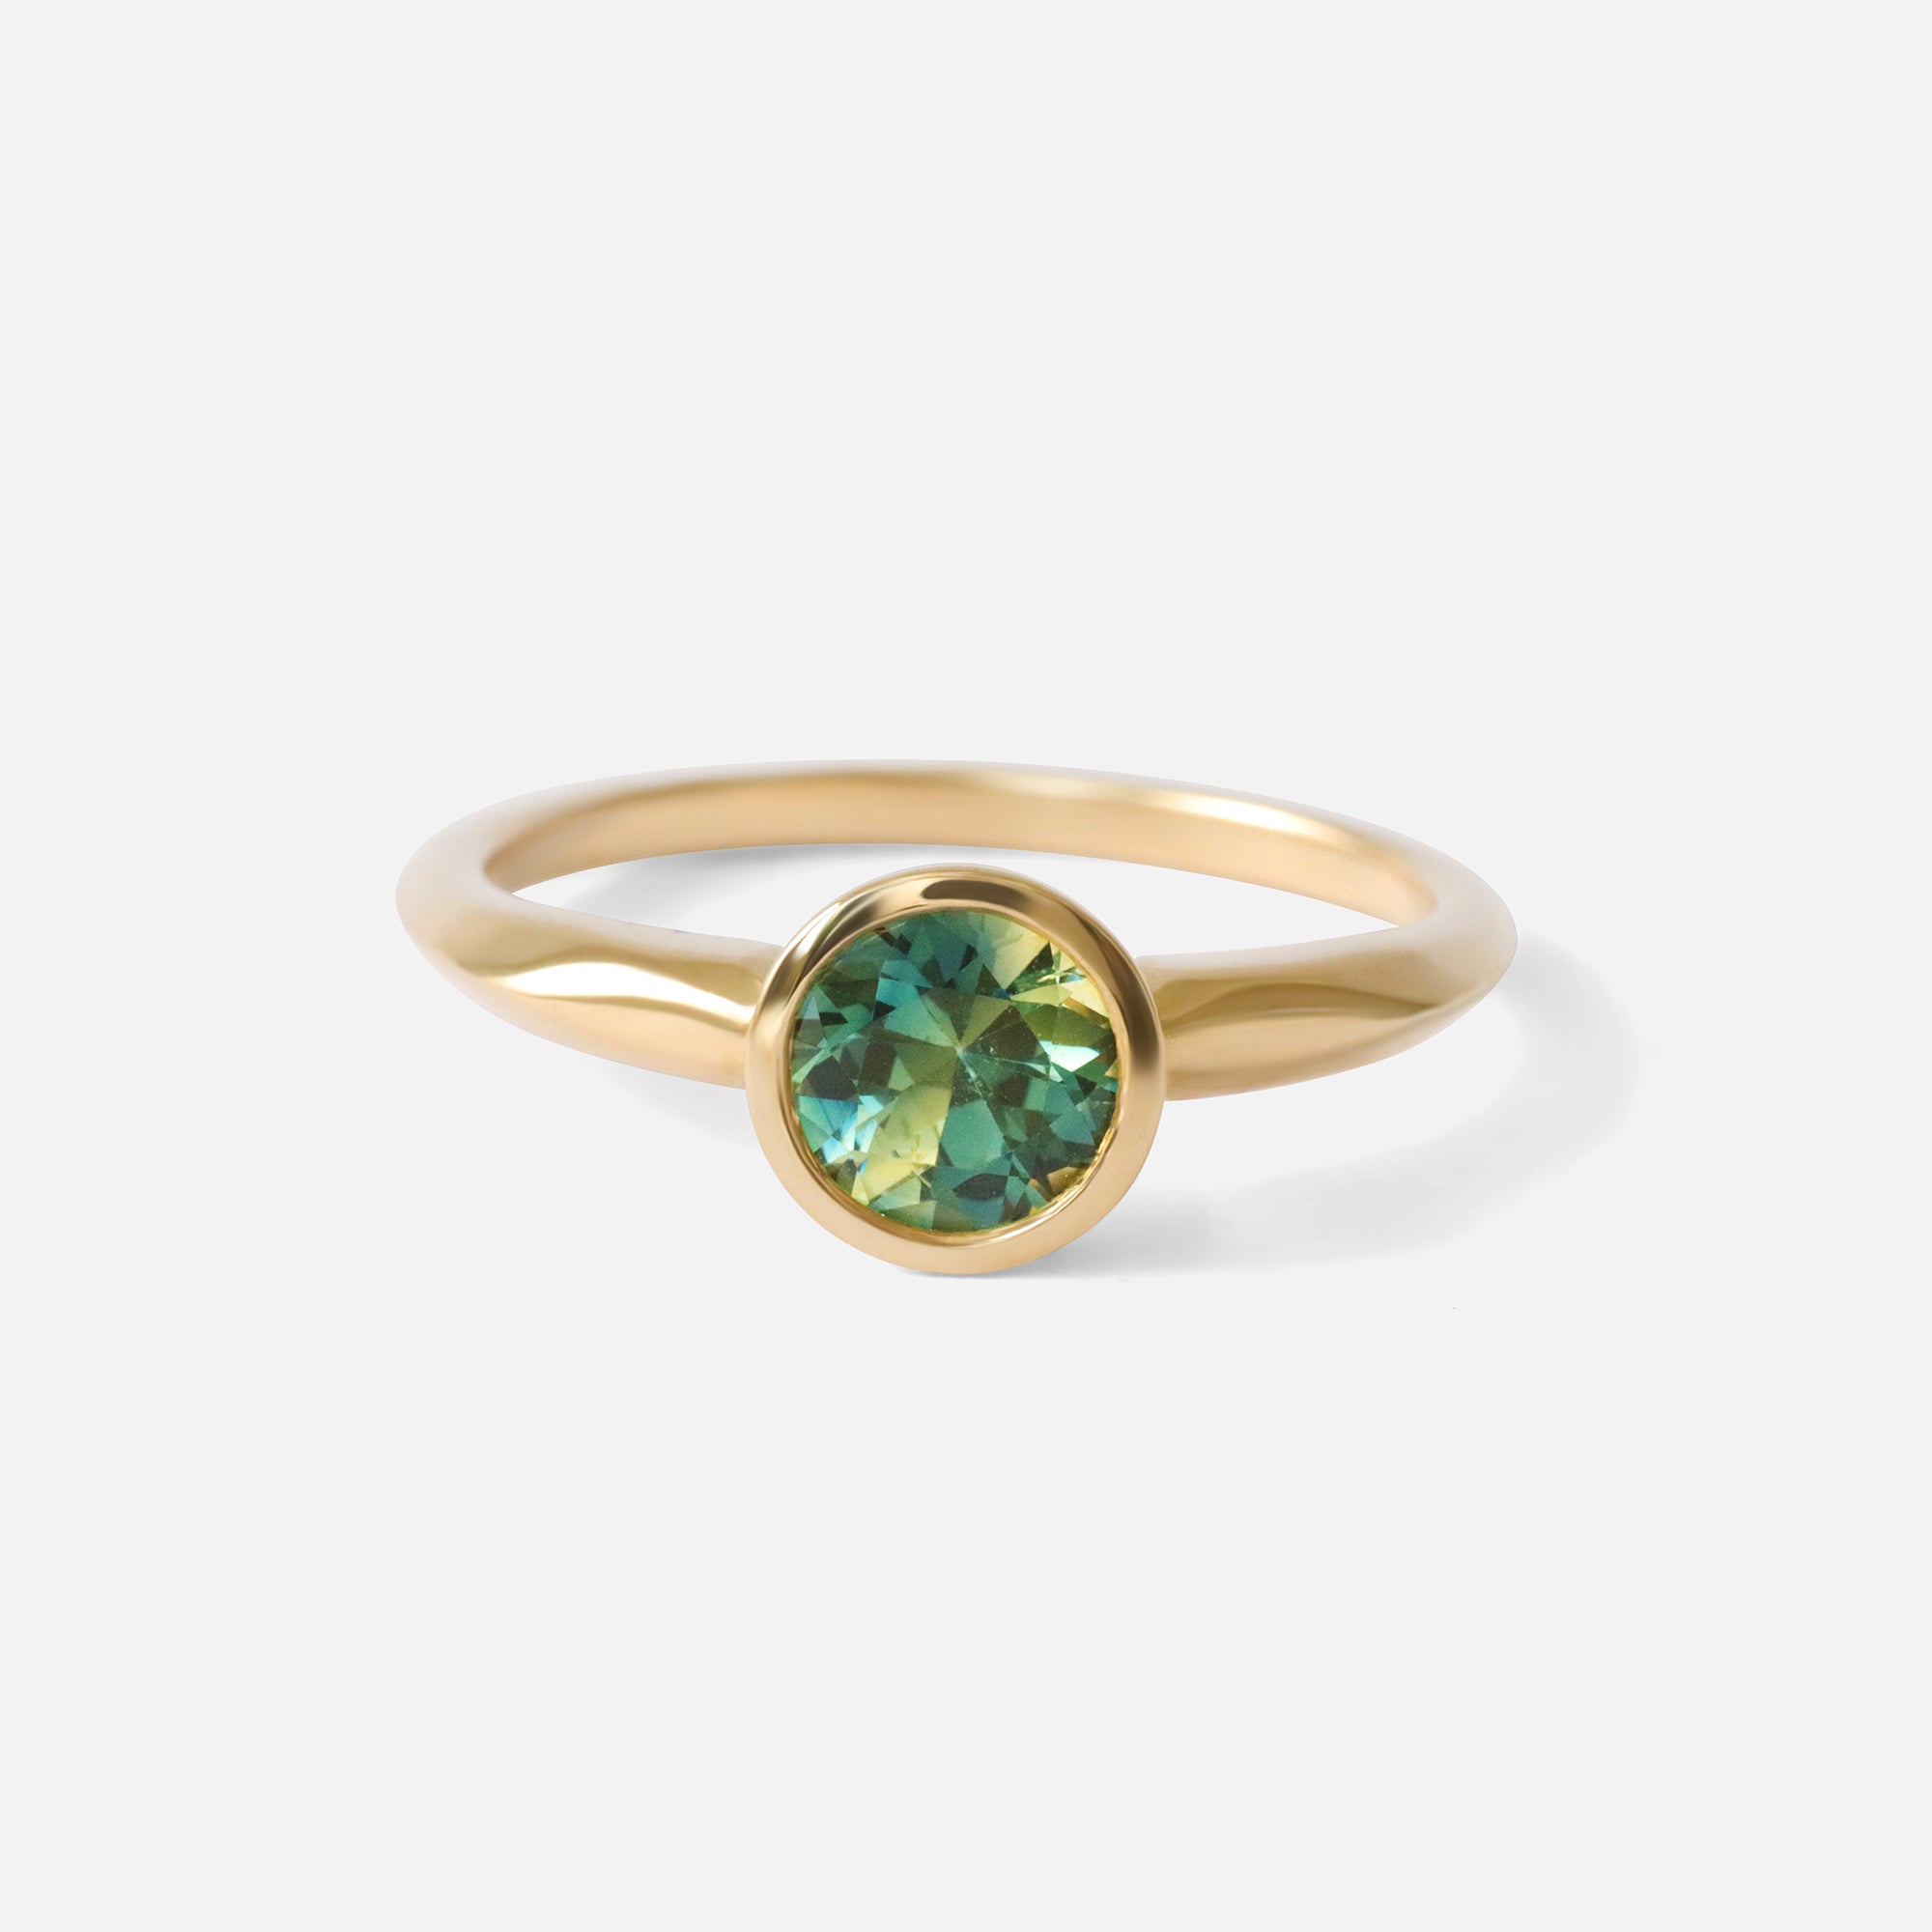 Lou / Sapphire Ring By Casual Seance in Engagement Rings Category